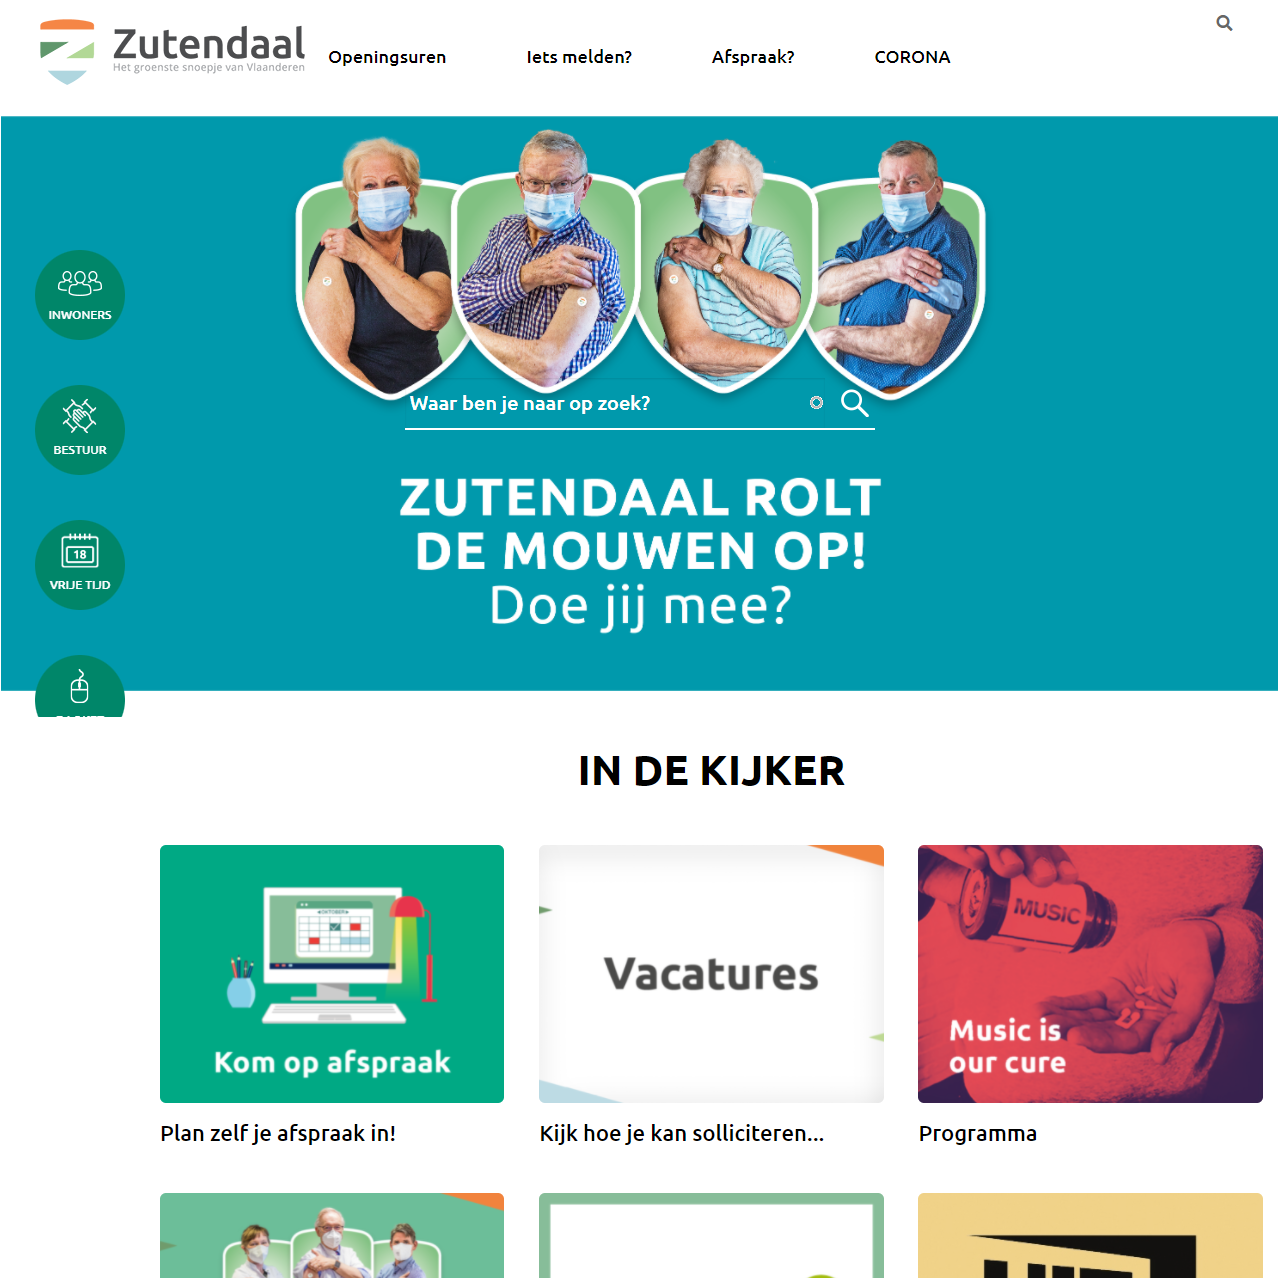 https://appoint.be/wp-content/uploads/2021/11/zutendaal.png